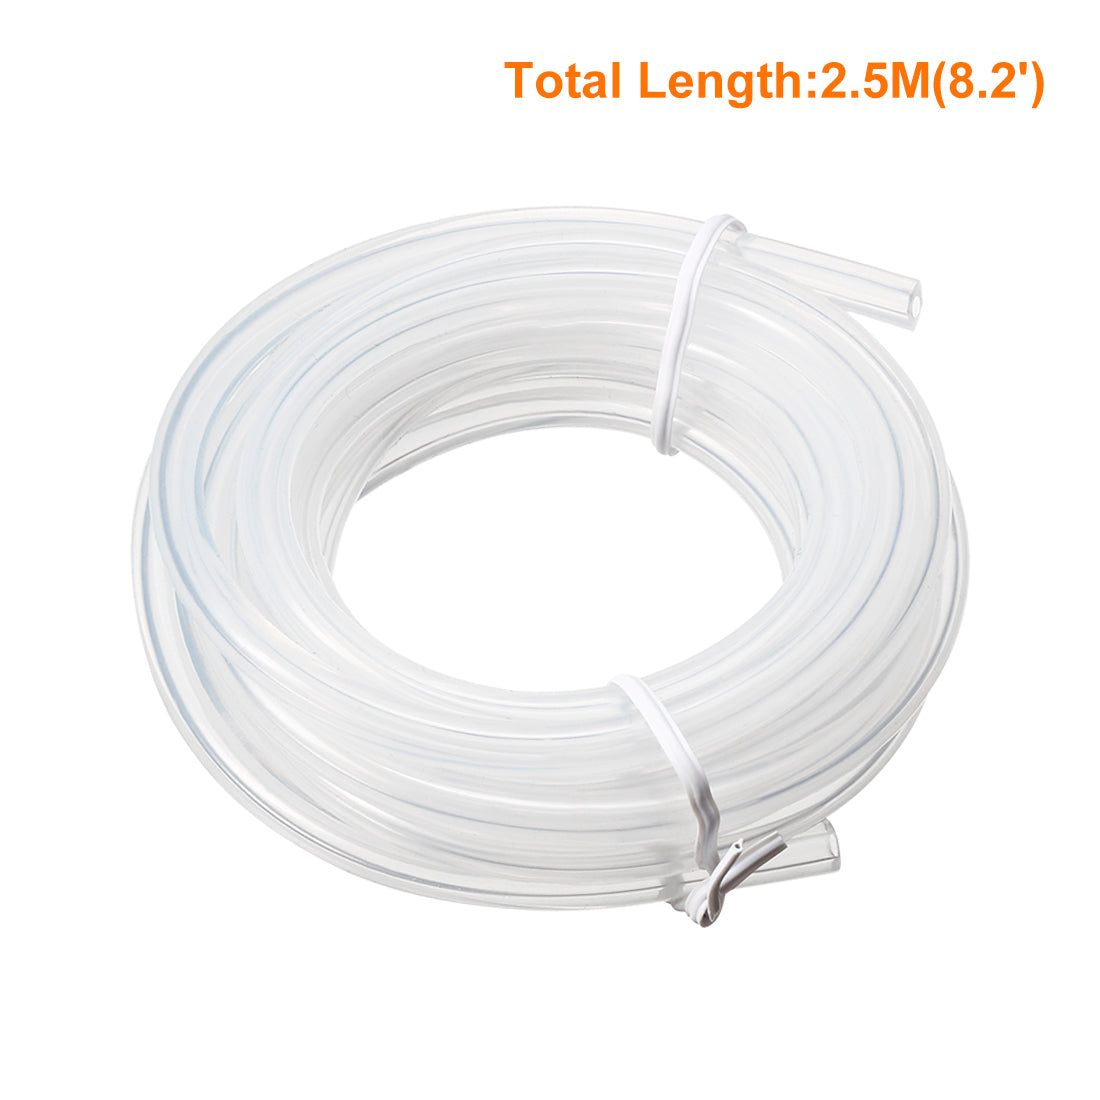 uxcell Uxcell Silicone Tube 2mm ID X 3mm OD 8.2' Flexible Silicone Rubber Tubing Water Air Hose Pipe Transparent for Pump Transfer